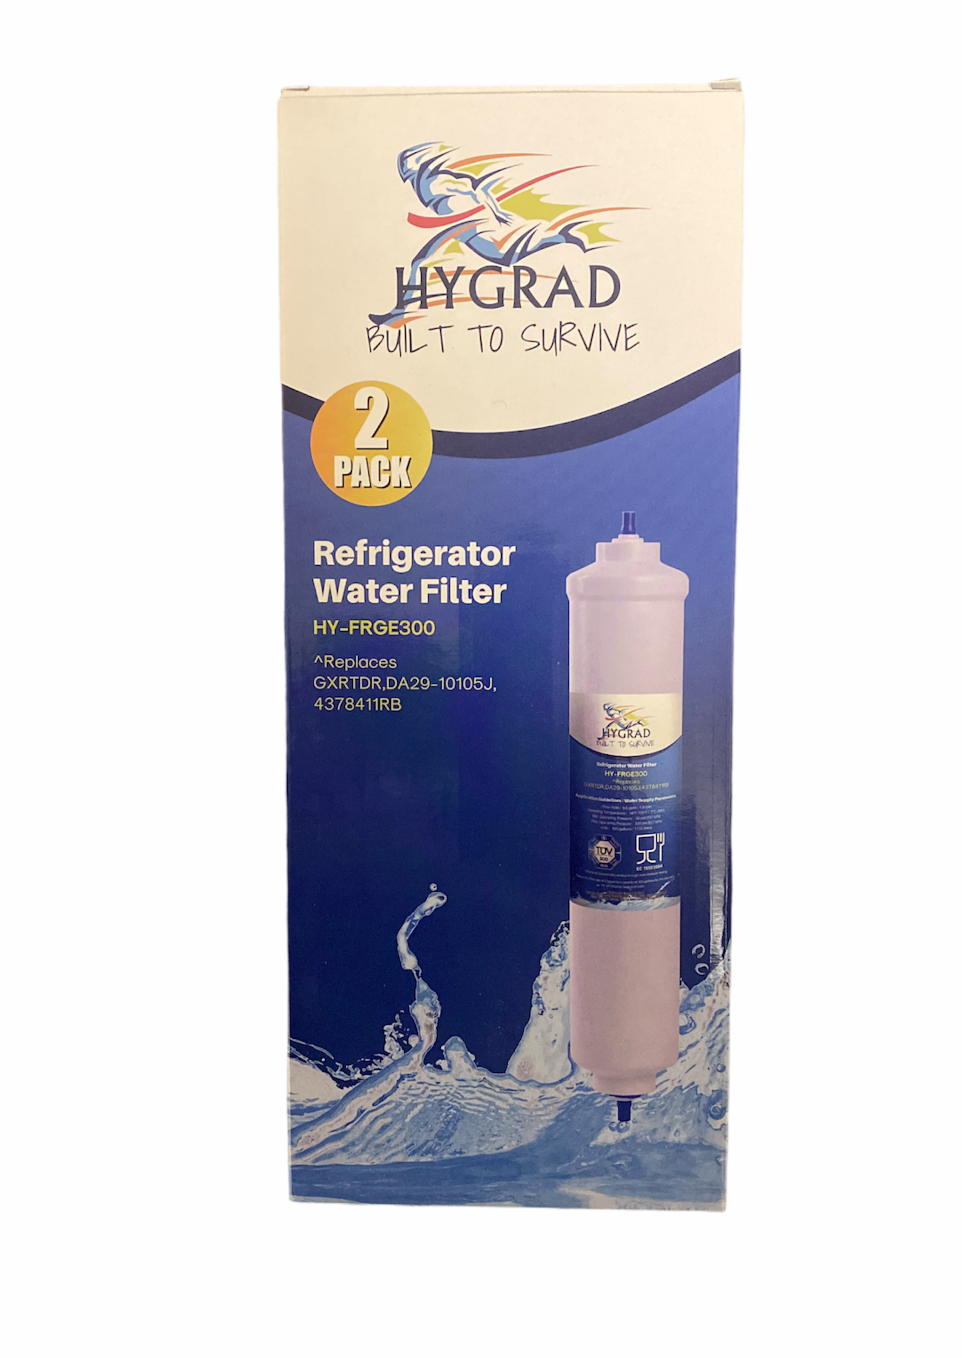 2 pack 3 pack Fridge Water Replacement Filters For SAMSUNG DA29-10105J by HYGRAD